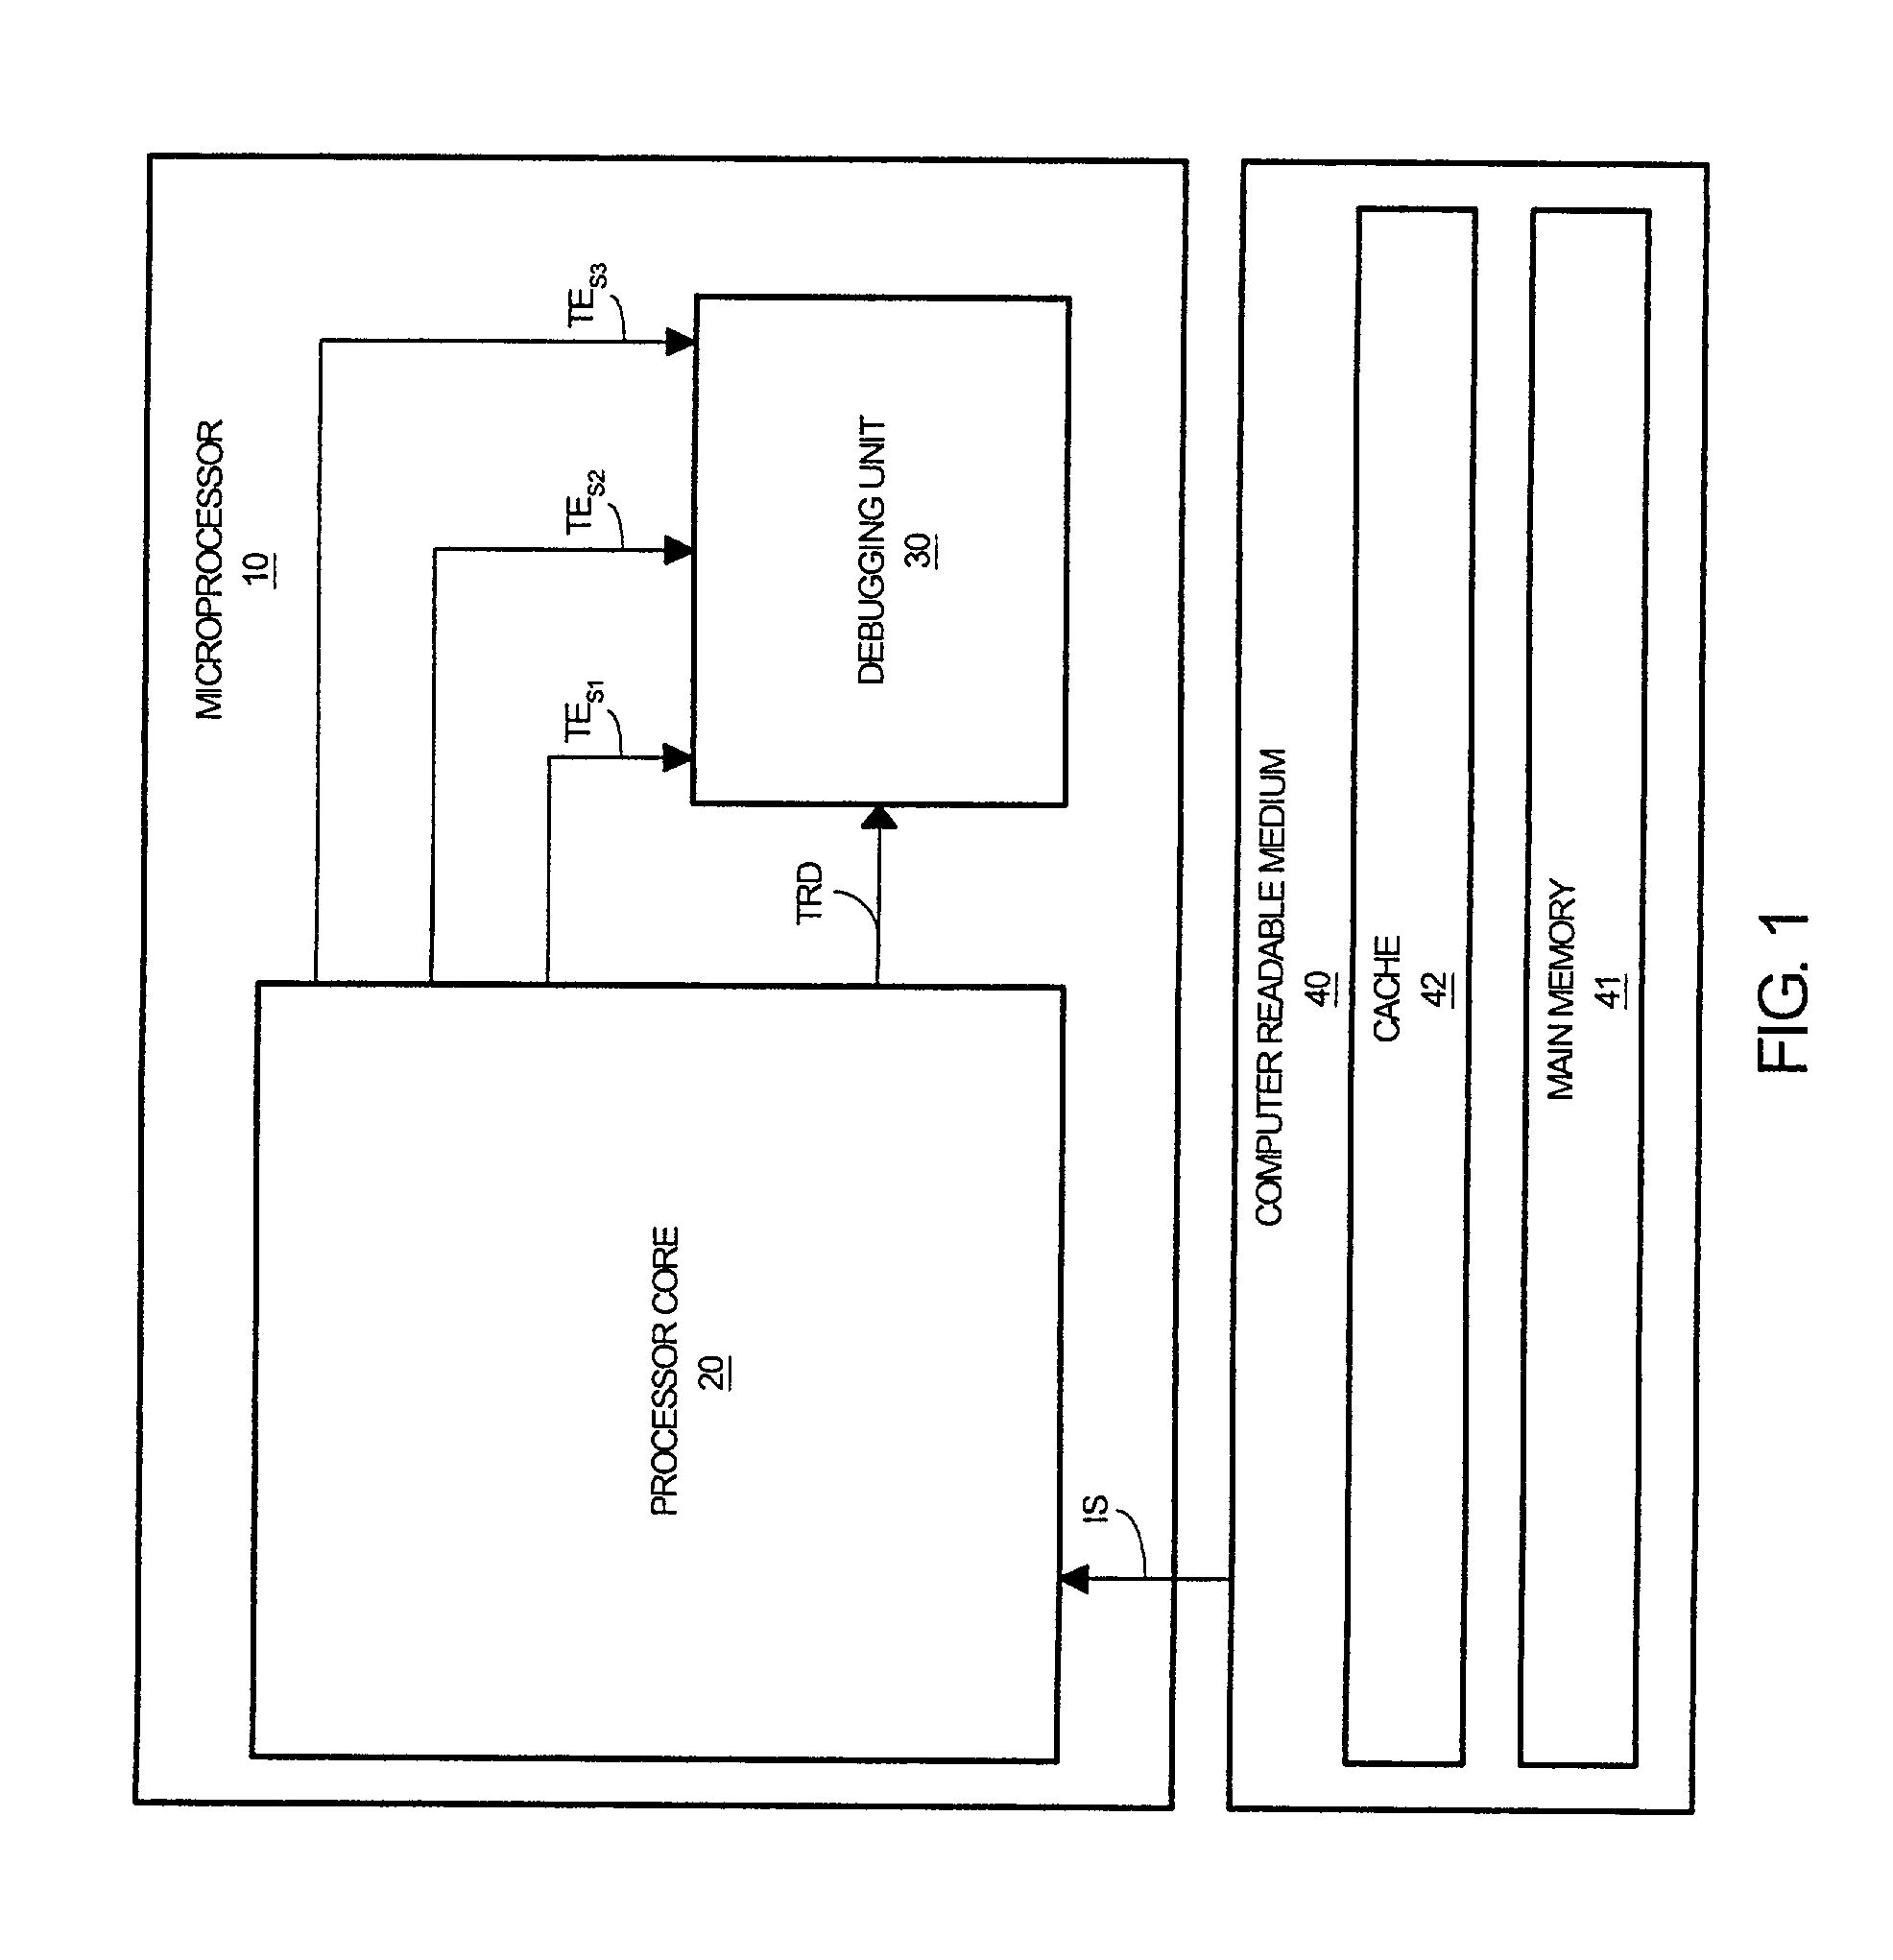 Method and system for triggering a debugging unit